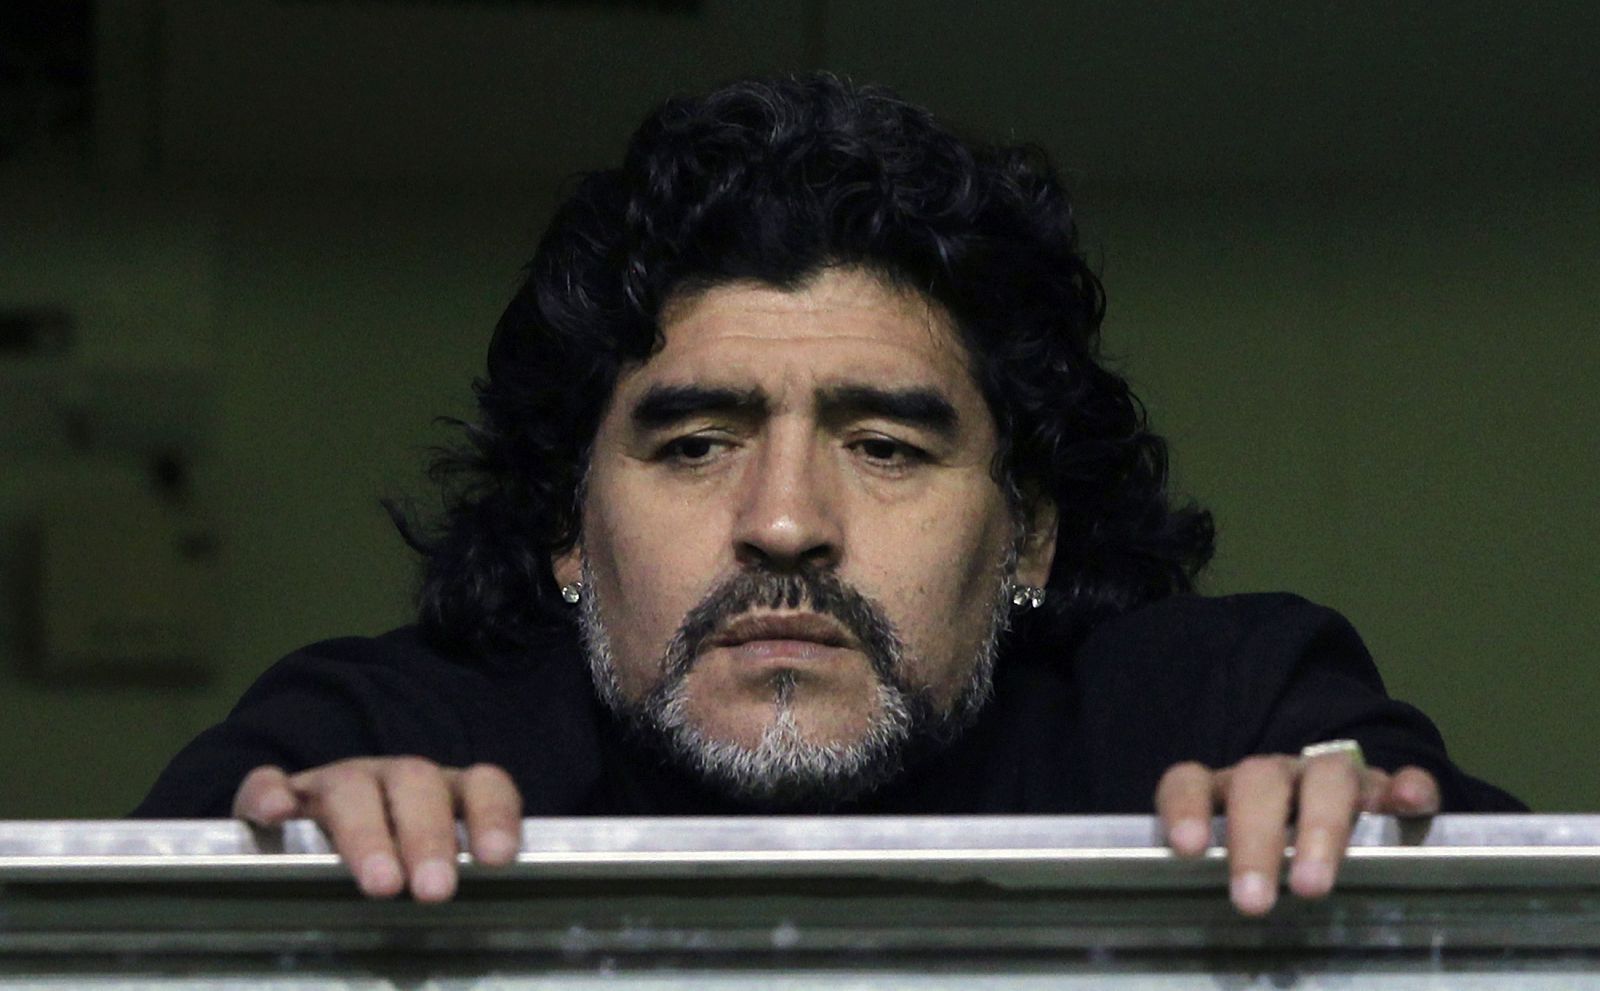 Former Argentine soccer star Maradona watches from a balcony the Argentine first division soccer match between Boca Juniors and Banfield in Buenos Aires